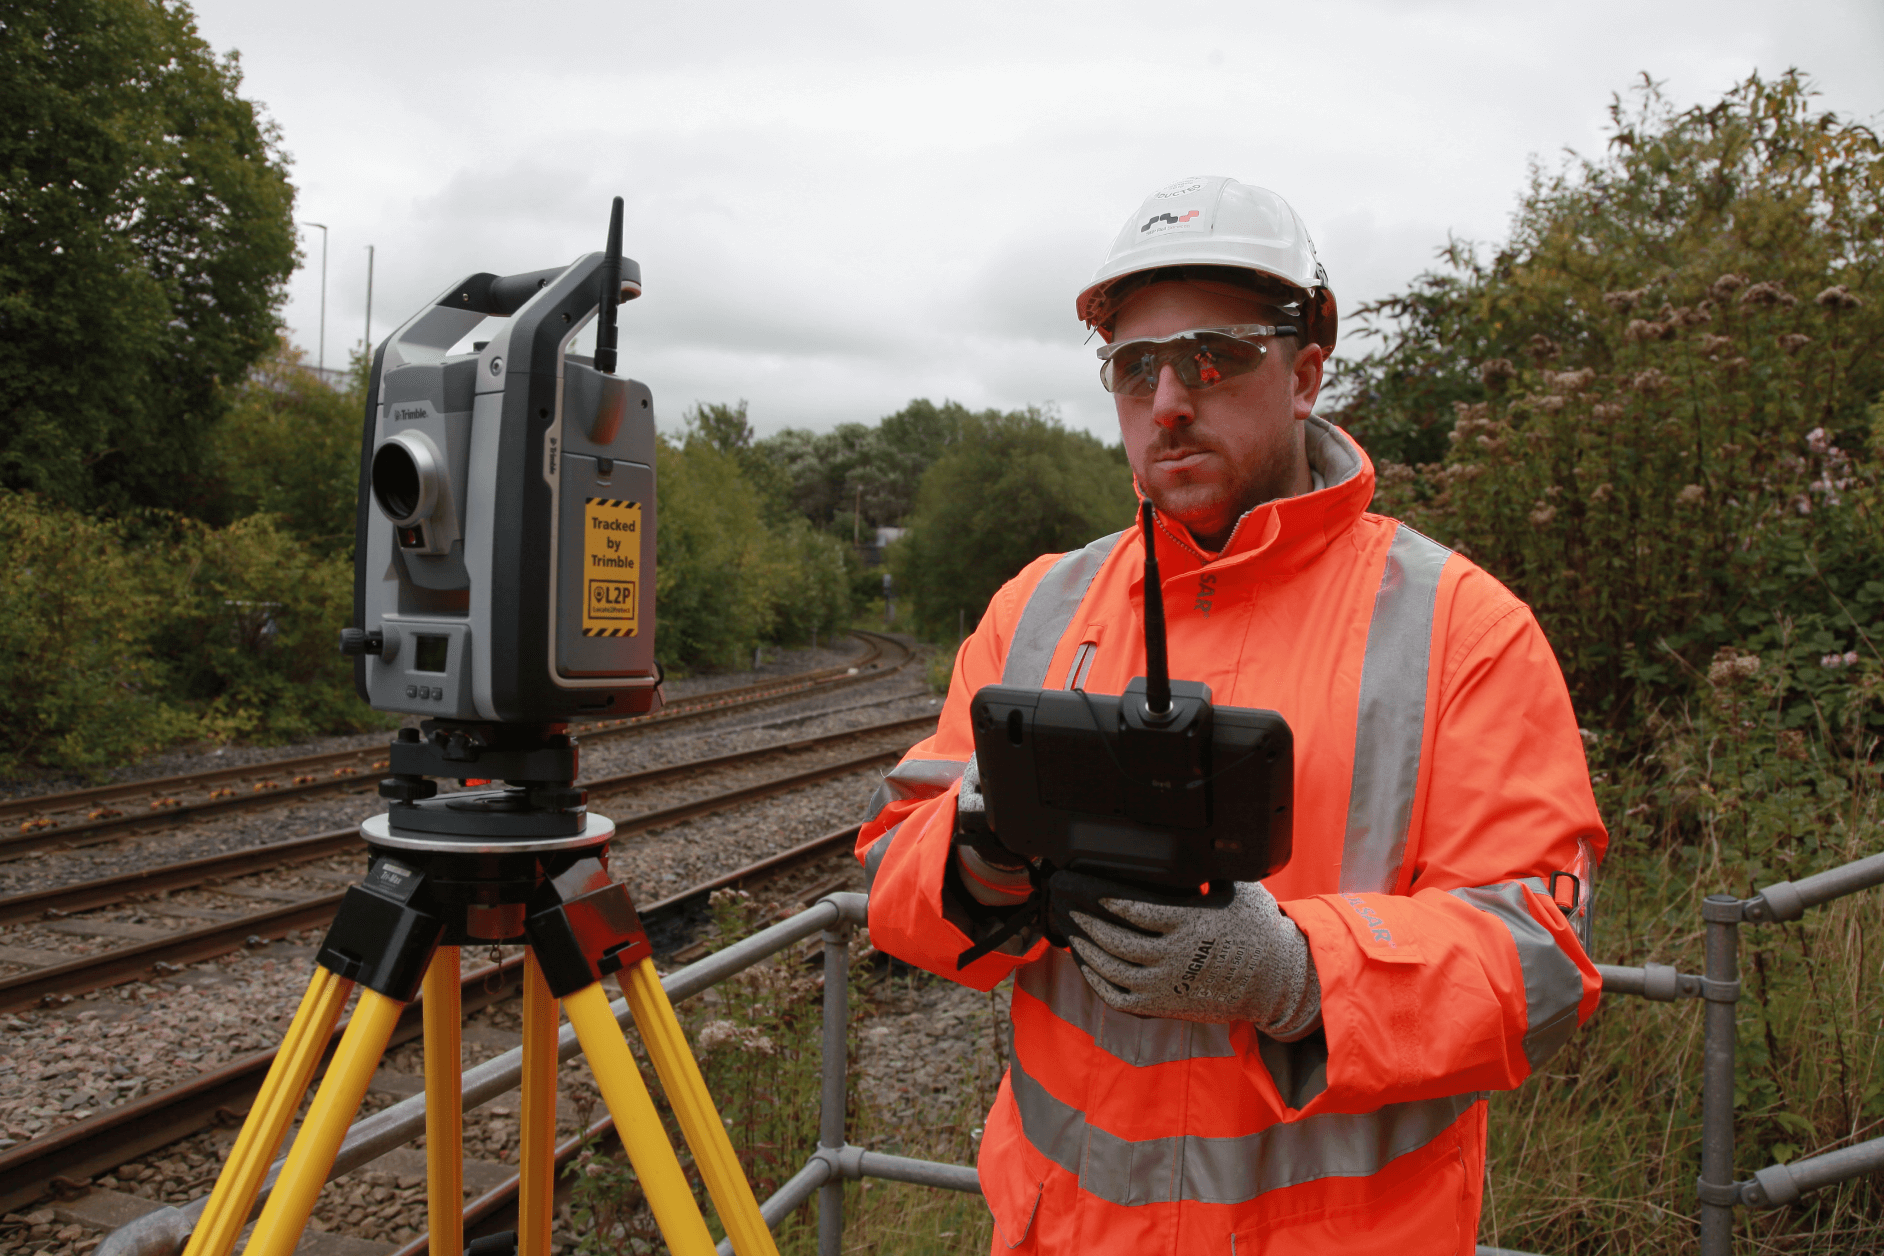 Recruiting for surveyors and lead surveyors